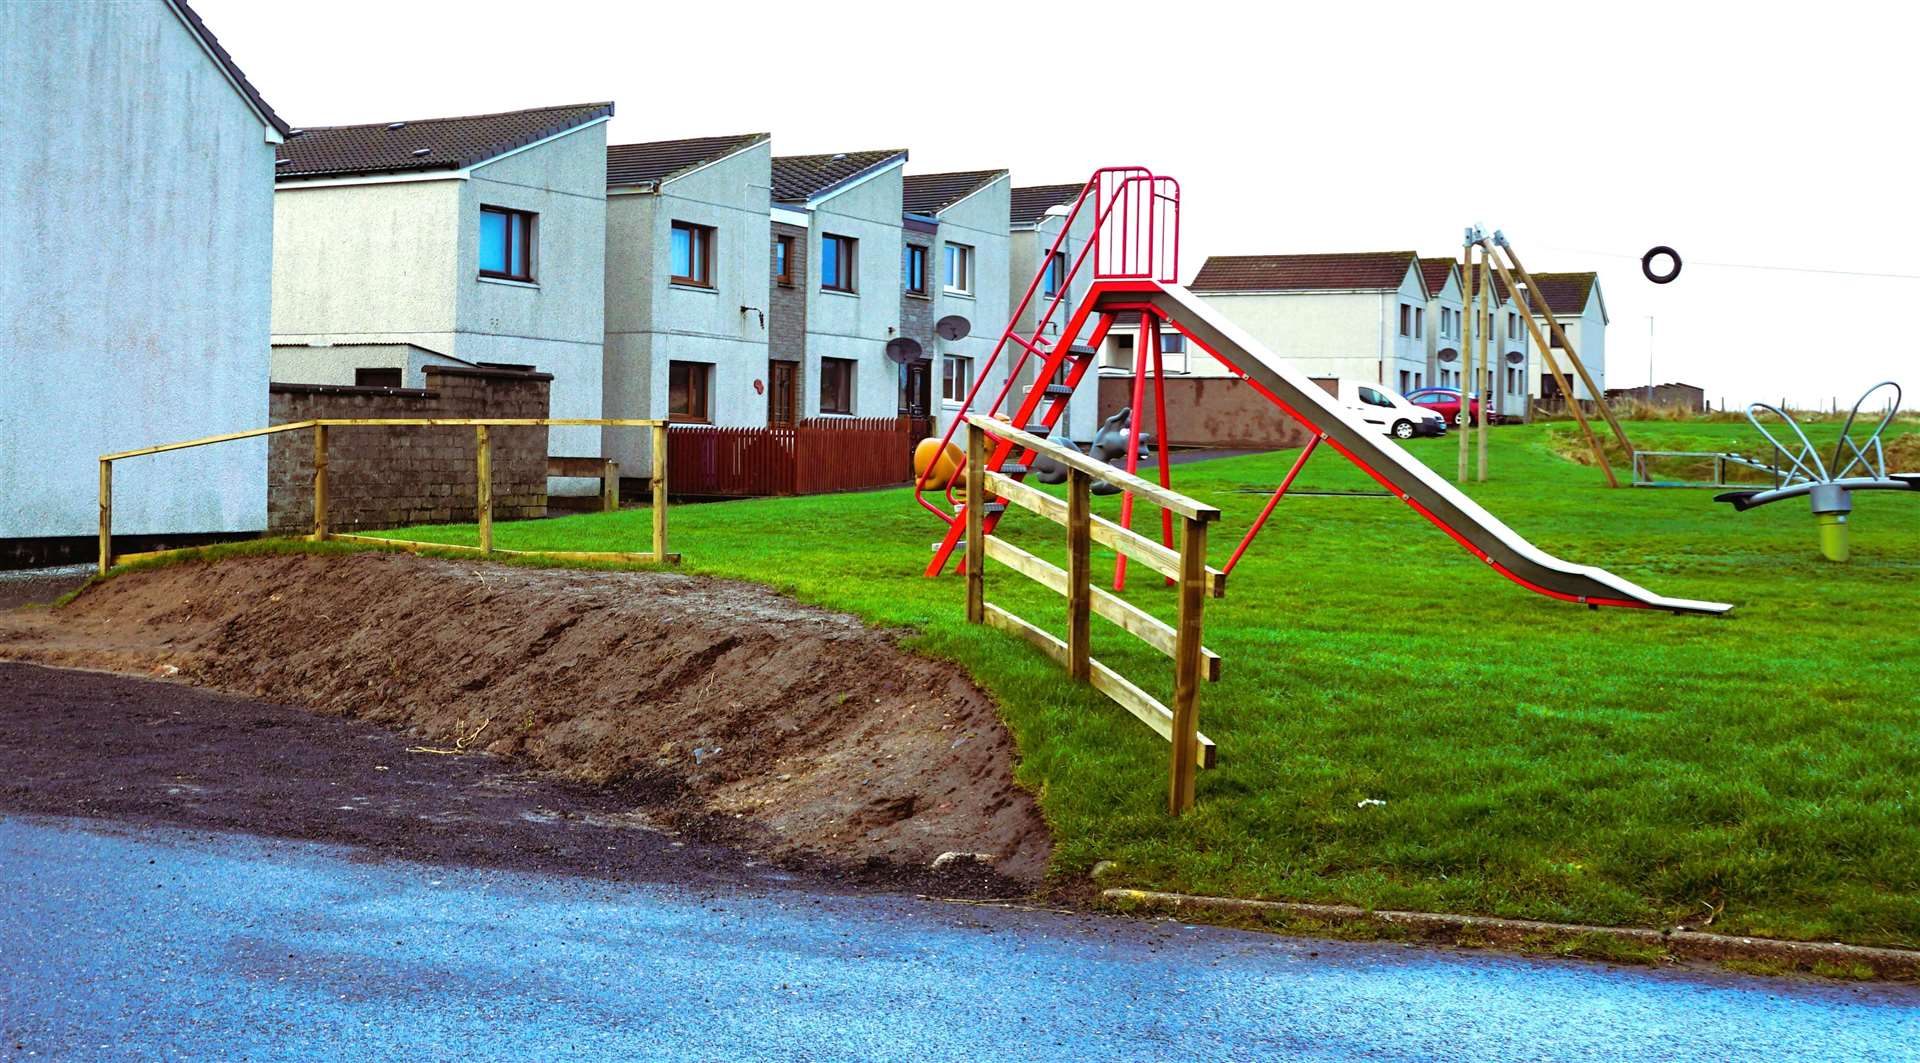 Cllr McEwan says that when the fence is finished it will be sitting too close to the children's slide. Picture: DGS